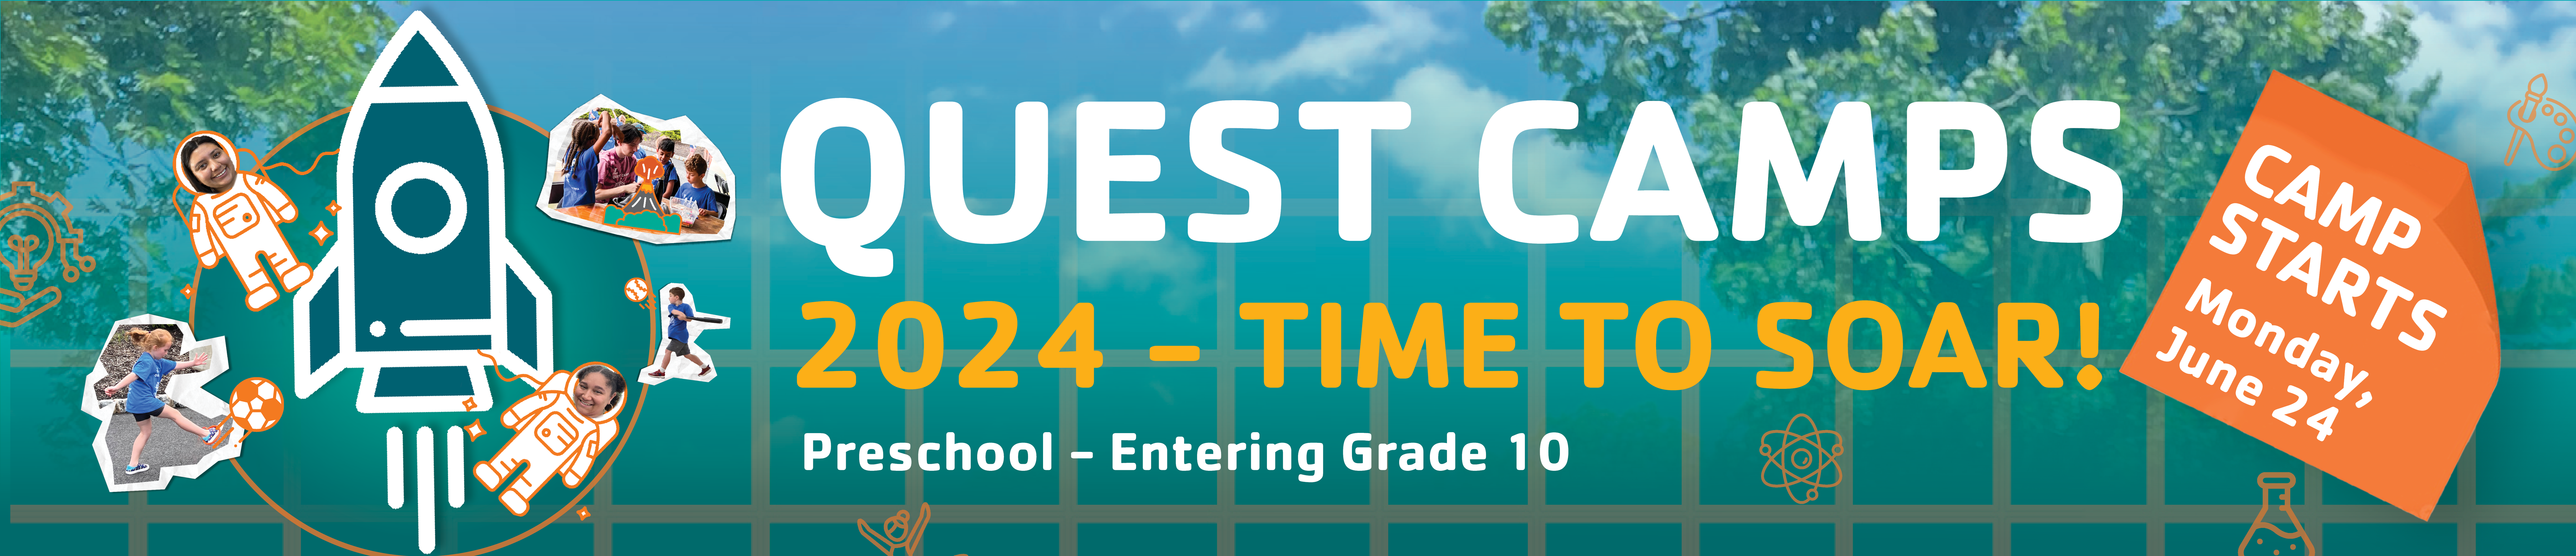 2024 Quest Camps - Page Banner